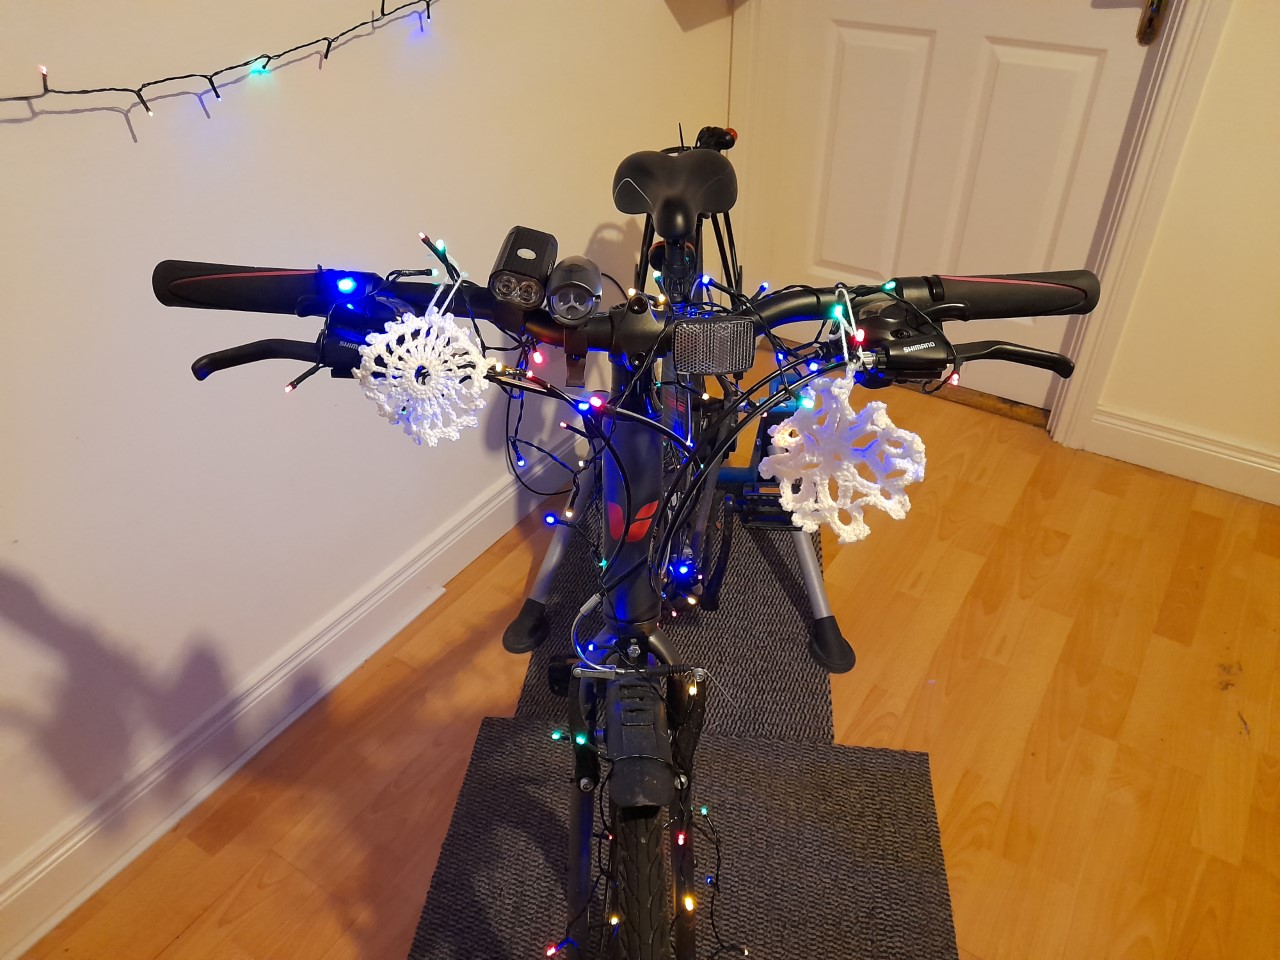 Solo Ride December 7th - 3rd Day of Festive Rides!